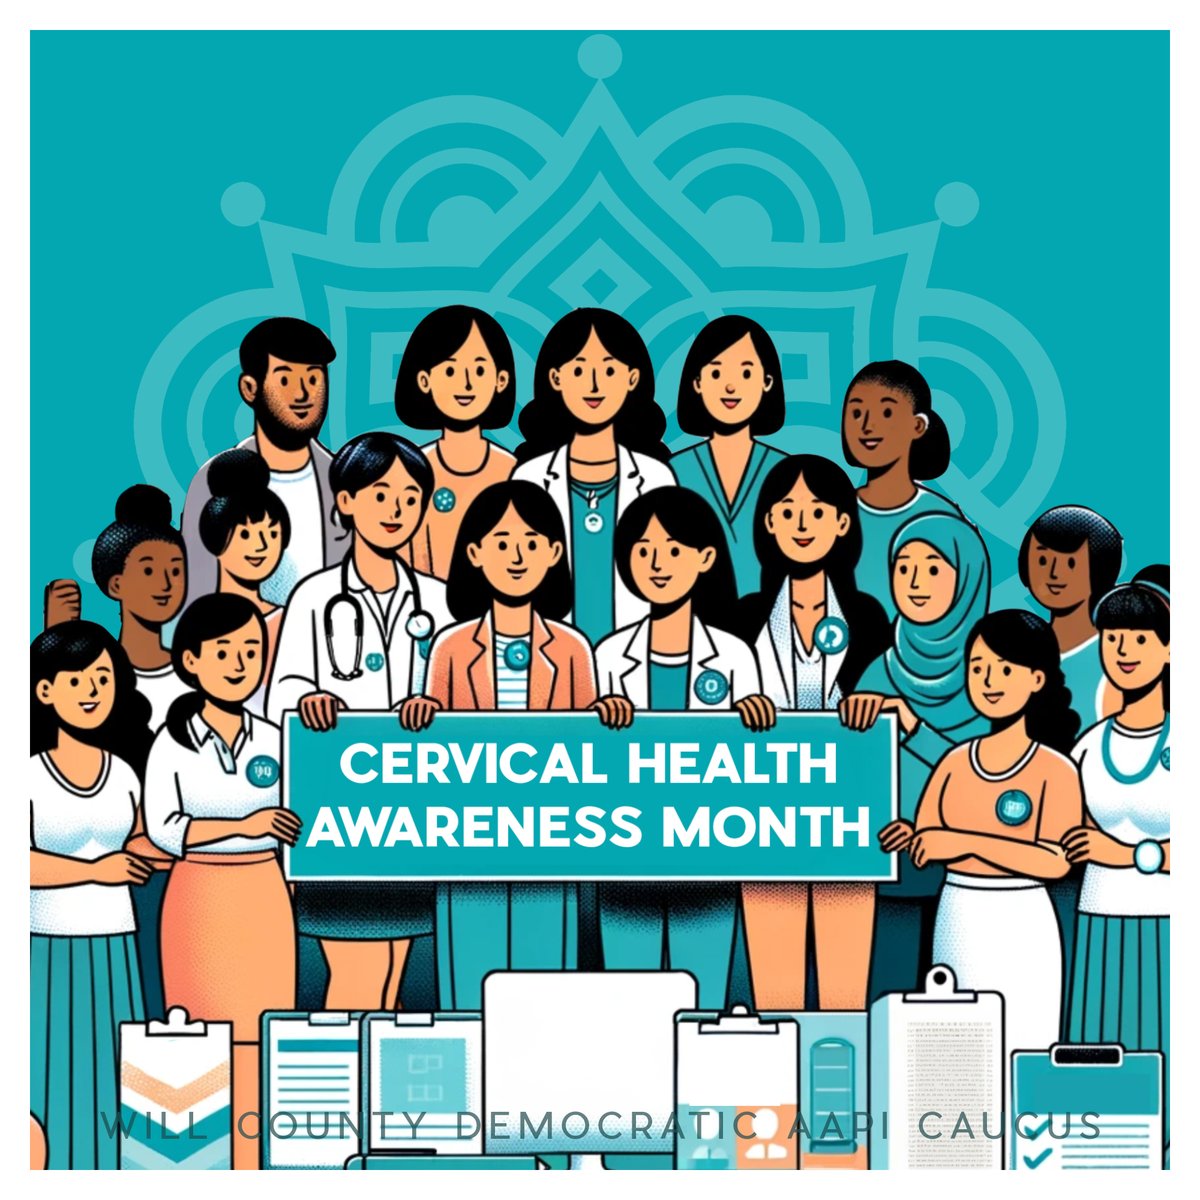 January is #CervicalHealthAwarenessMonth. AAPI women face lower screening rates and higher mortality. Let's support tailored programs, overcome cultural and language barriers, and ensure access to vital screenings. Unite for #CervicalHealthAwareness and #HealthEquity in 2024!